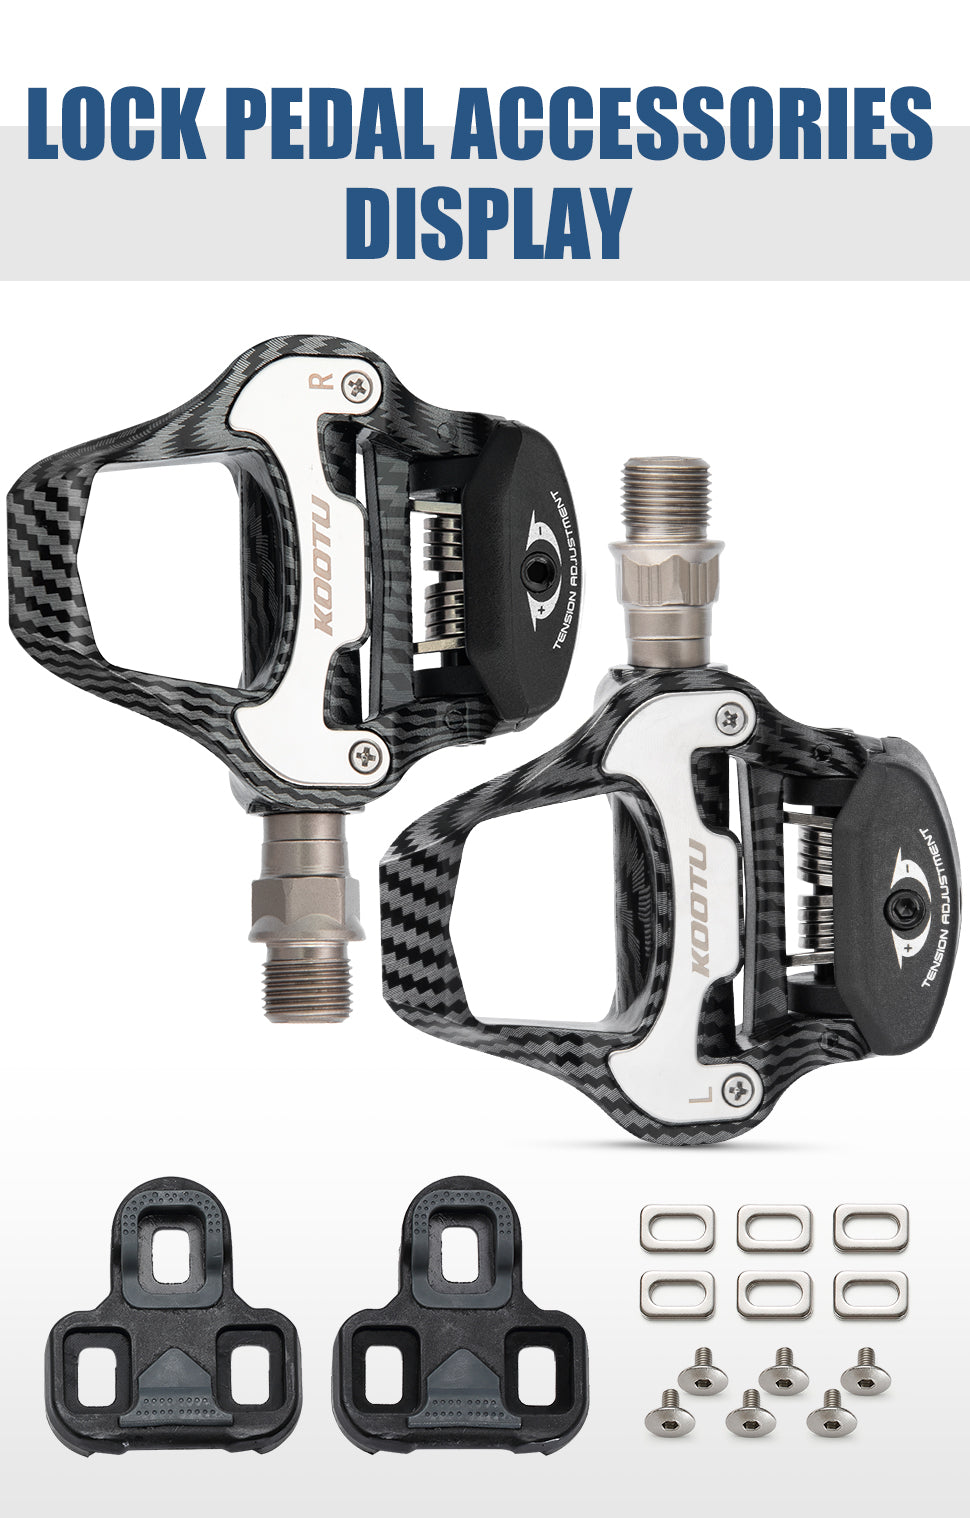 KOOTU Road Bike Pedals Carbon Pattern Clip Pedals For KEO Look Pedals SPD System -KOOTU BIKE